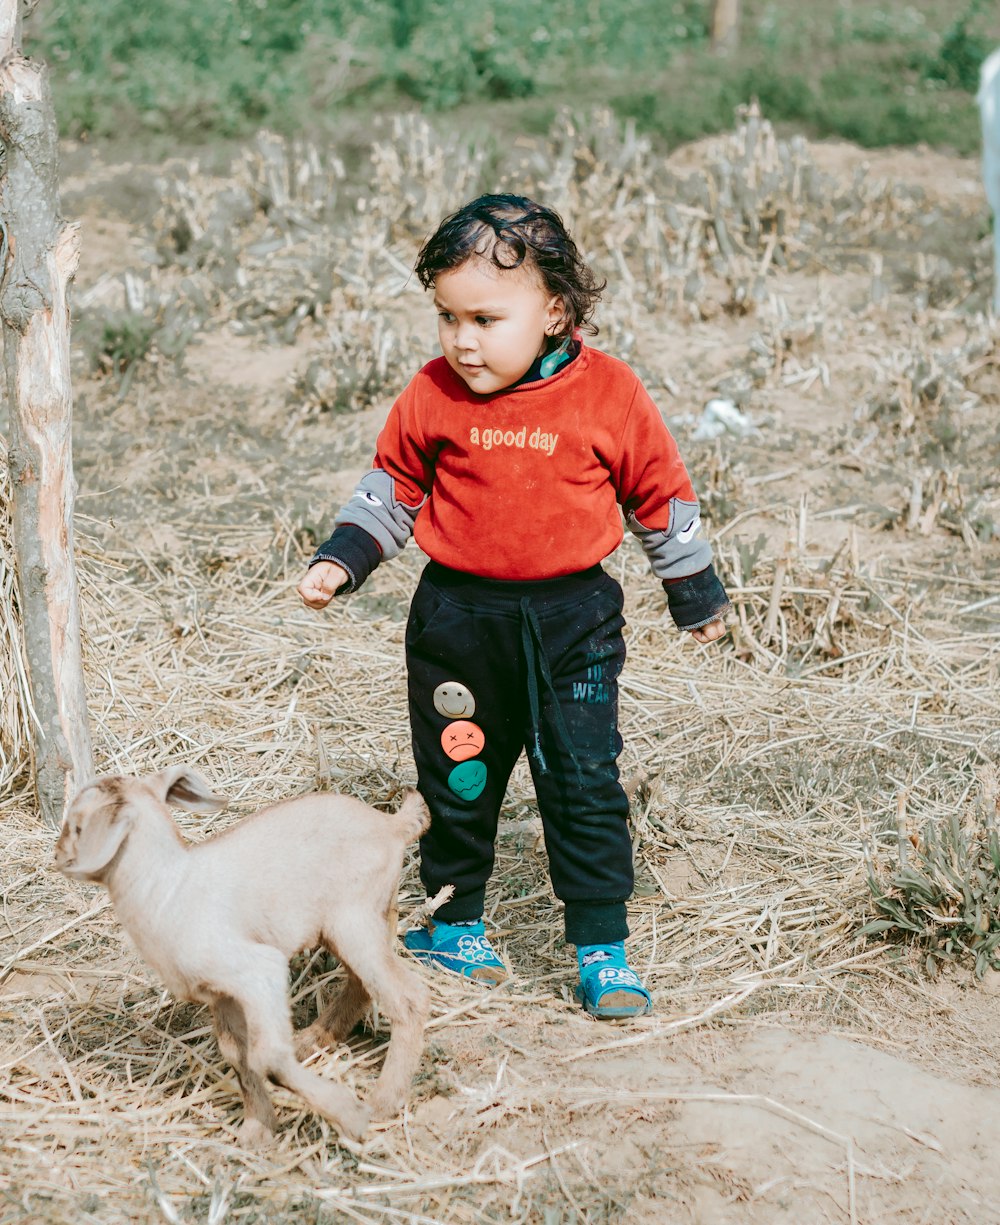 a small child standing next to a baby goat